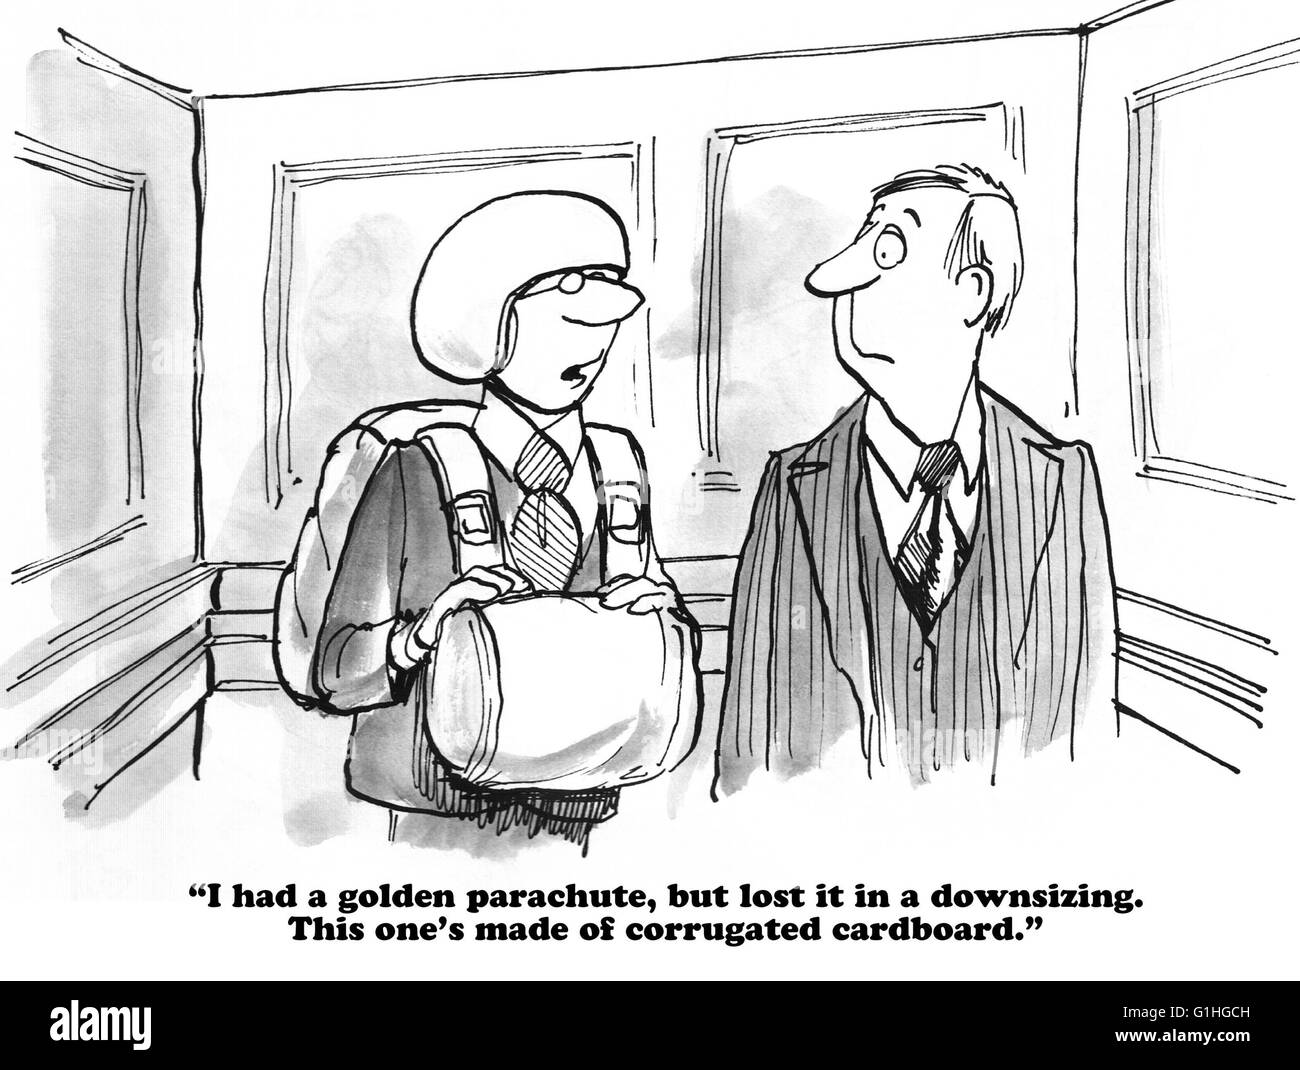 Business cartoon about losing a golden parachute. Stock Photo